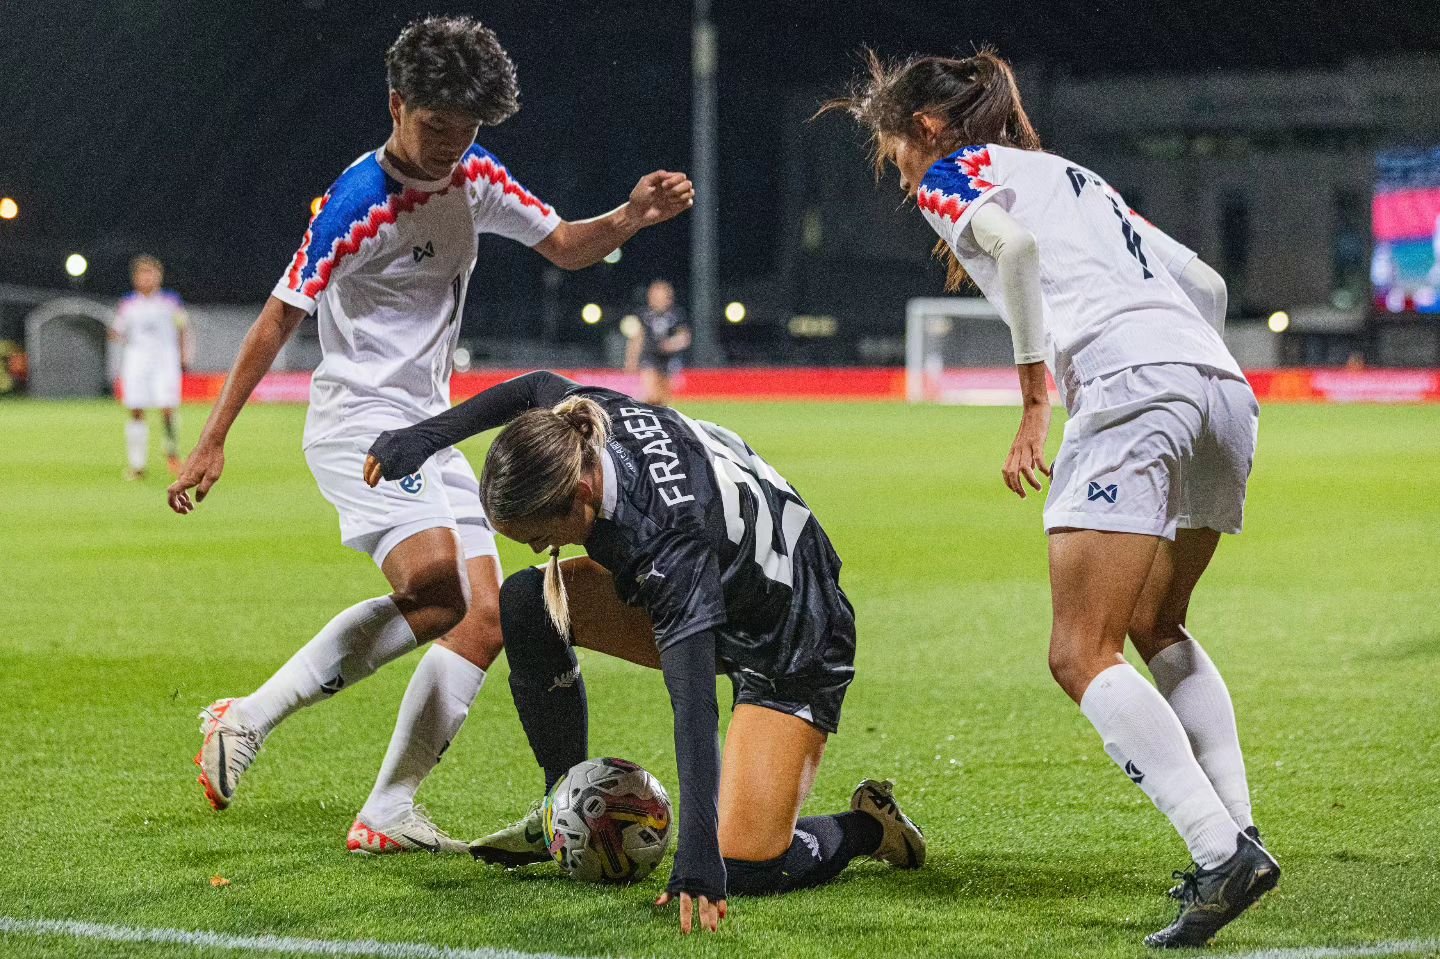 Photo highlights from the International friendly between New Zealand and Thailand on a frustrating night in Christchurch as they were held to a draw despite having 22 shots to Thailand's one &ndash; and putting seven of those on target at the Apollo 